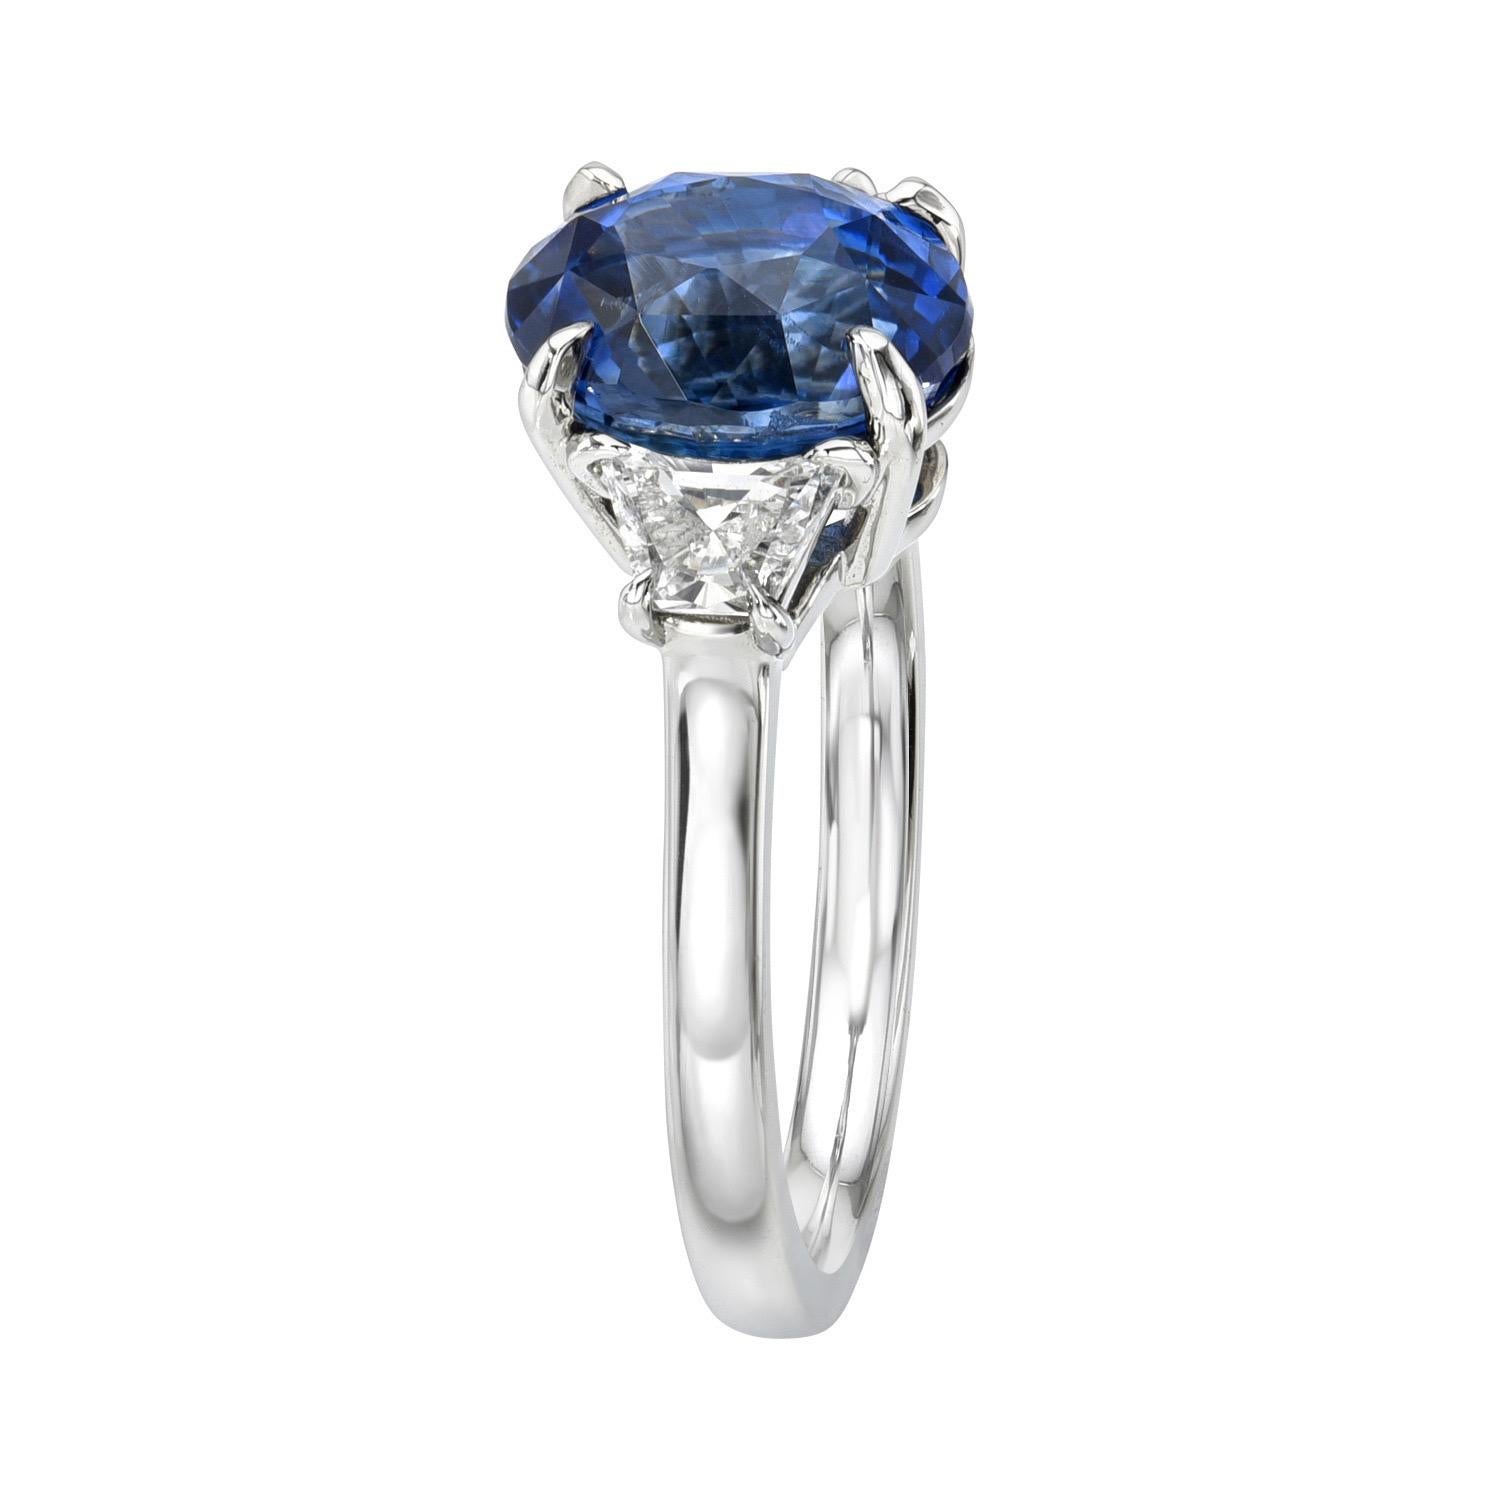 Unheated 3.47 carat Ceylon Blue Sapphire oval, three stone platinum ring, flanked by a pair of 0.45 carat, F/VS2-SI1 Crescent Trapezoid diamonds.
Ring size 6. Resizing is complementary upon request.
The CDC gem report is attached to the image